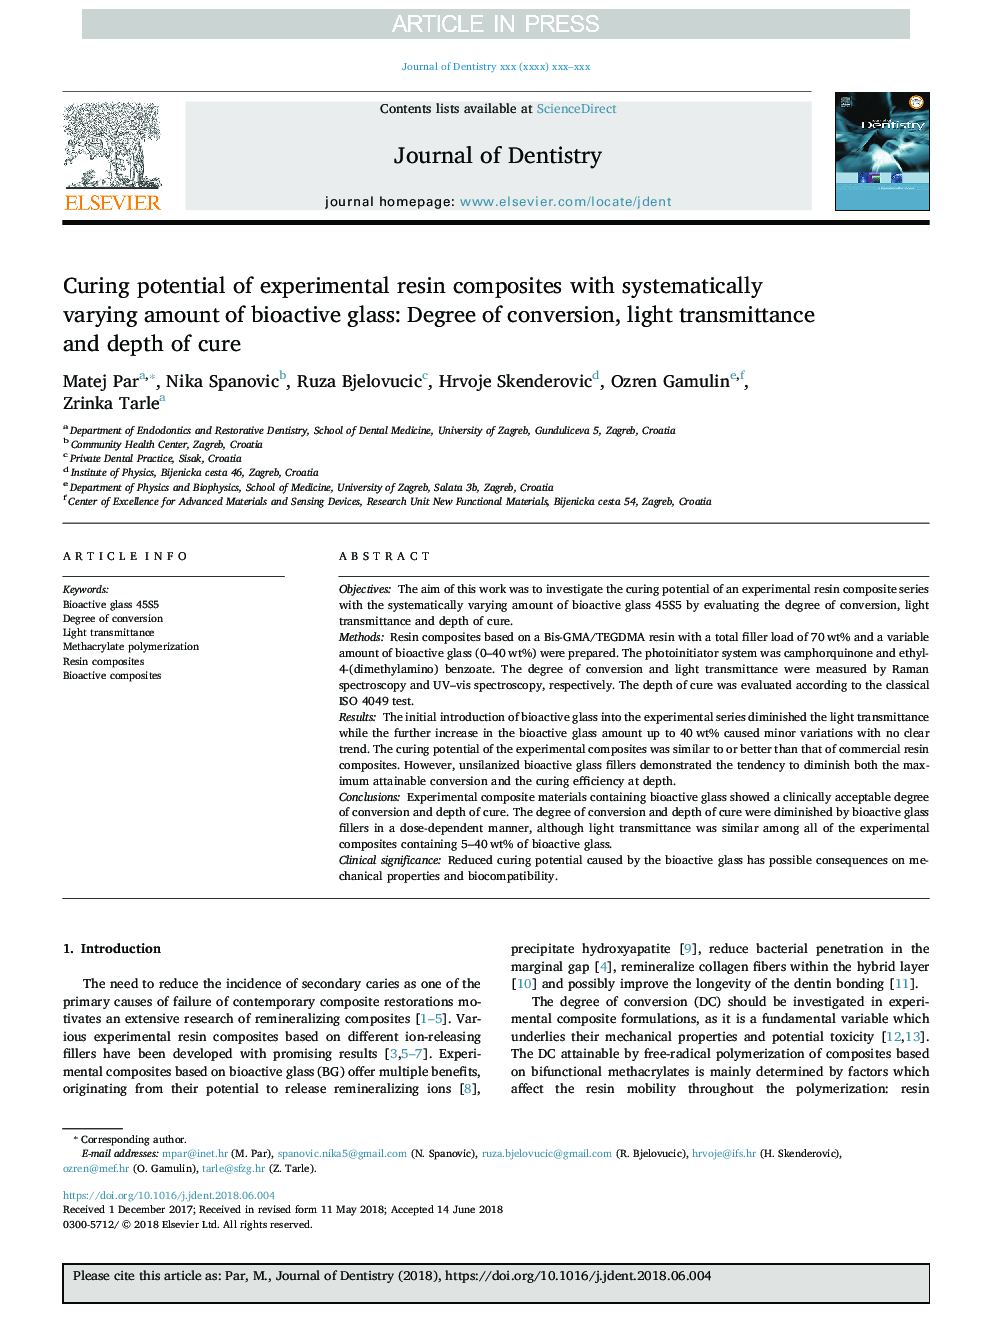 Curing potential of experimental resin composites with systematically varying amount of bioactive glass: Degree of conversion, light transmittance and depth of cure